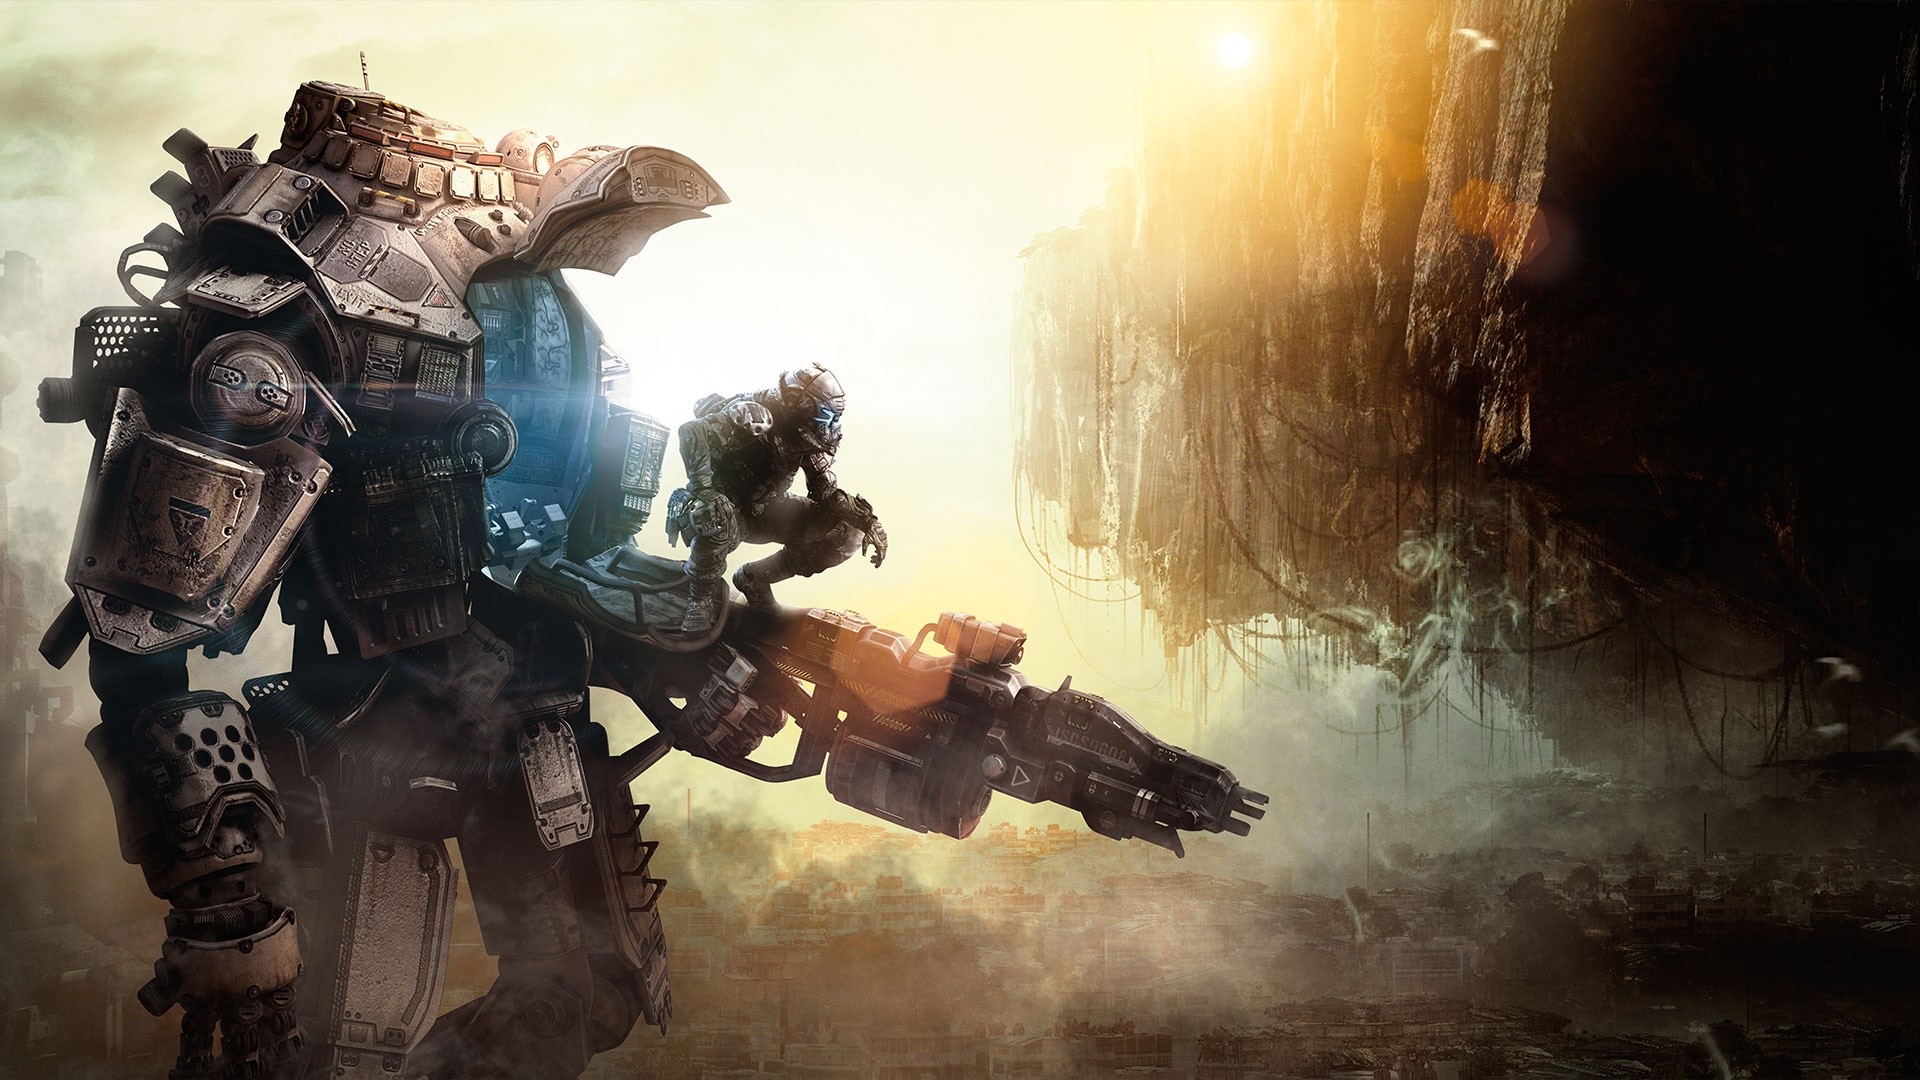 Preview Wallpaper Titanfall Game Heroes Robot 1920x1080 1920x1080